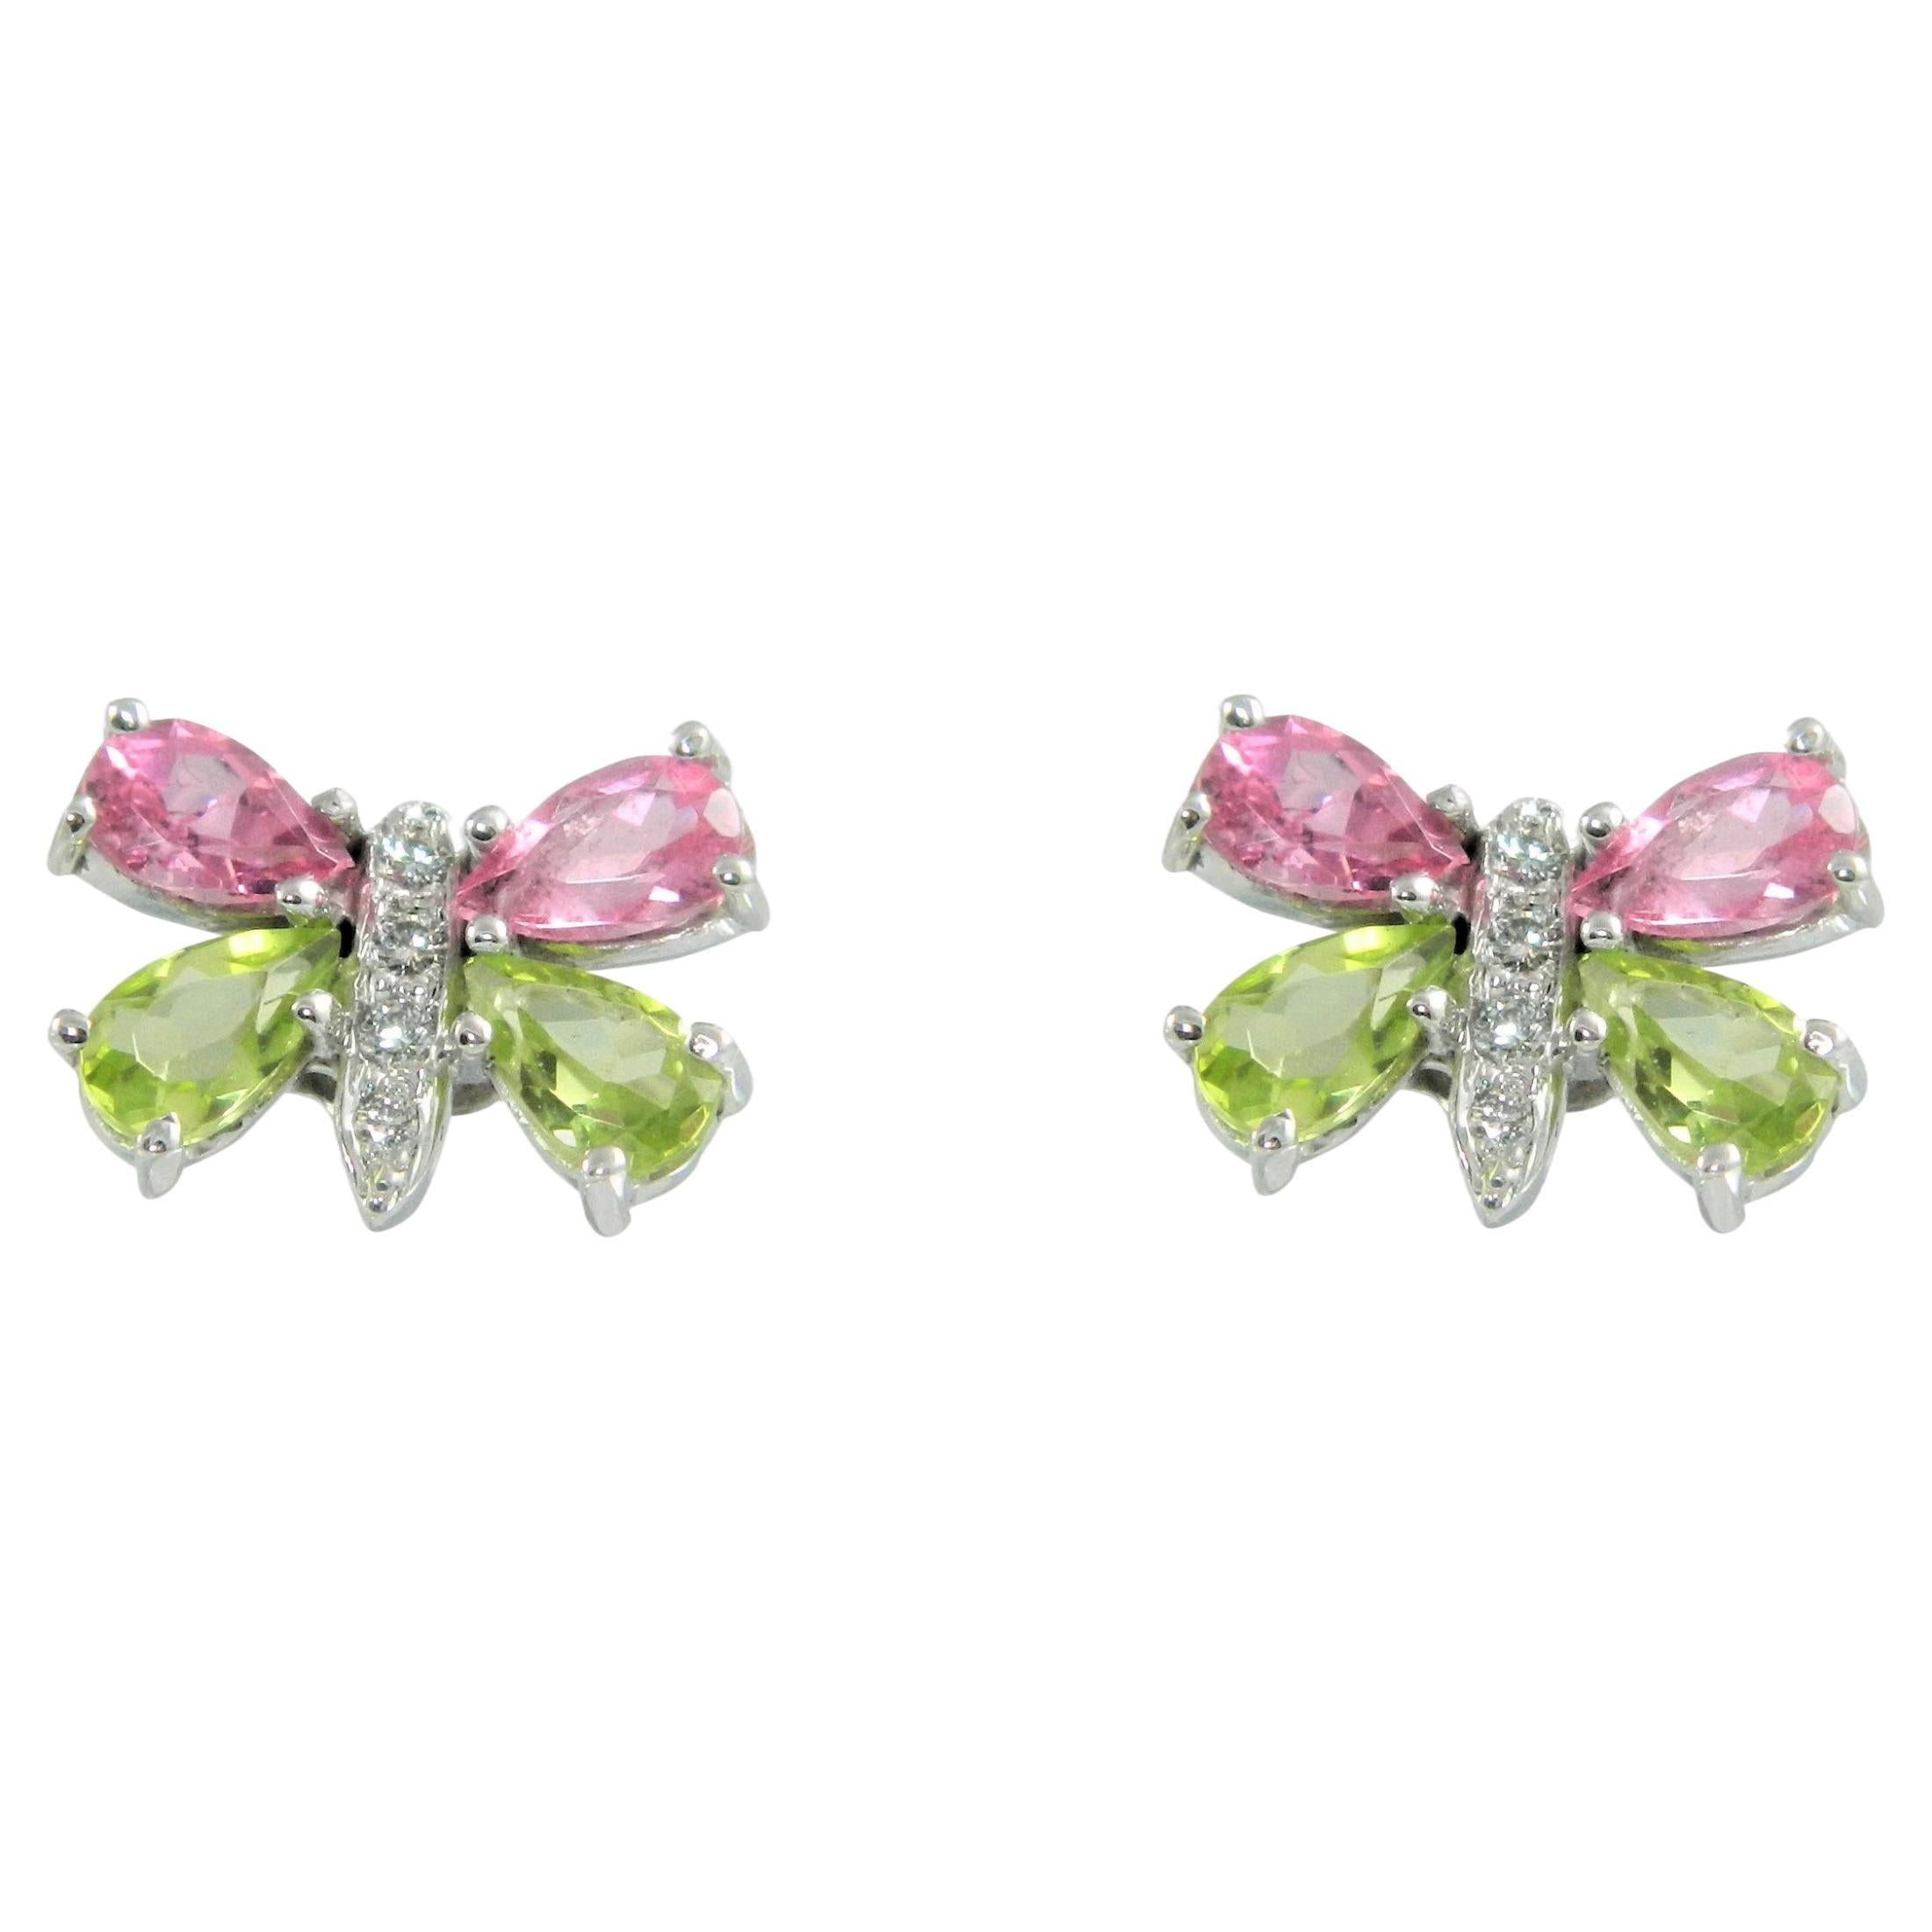 Colorful Butterfly Earrings in 14K White Gold, Peridot and Pink Tourmaline Wings For Sale